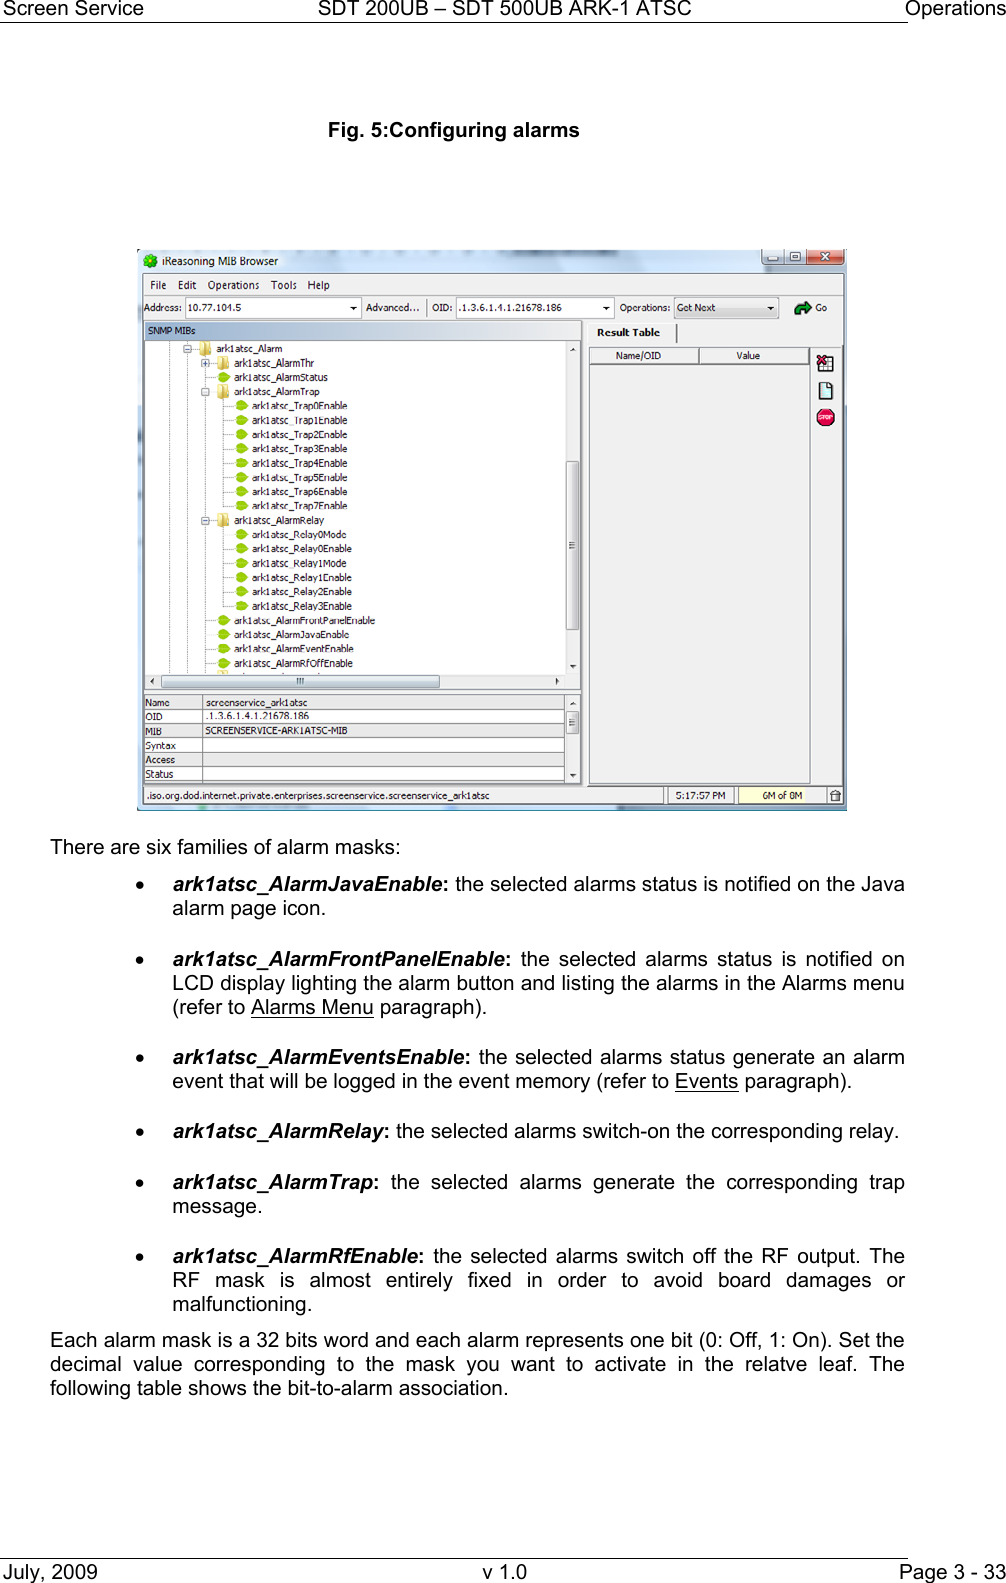 Screen Service  SDT 200UB – SDT 500UB ARK-1 ATSC  Operations July, 2009  v 1.0  Page 3 - 33  Fig. 5:Configuring alarms      There are six families of alarm masks: • ark1atsc_AlarmJavaEnable: the selected alarms status is notified on the Java alarm page icon. • ark1atsc_AlarmFrontPanelEnable: the selected alarms status is notified on LCD display lighting the alarm button and listing the alarms in the Alarms menu (refer to Alarms Menu paragraph). • ark1atsc_AlarmEventsEnable: the selected alarms status generate an alarm event that will be logged in the event memory (refer to Events paragraph). • ark1atsc_AlarmRelay: the selected alarms switch-on the corresponding relay. • ark1atsc_AlarmTrap: the selected alarms generate the corresponding trap message. • ark1atsc_AlarmRfEnable: the selected alarms switch off the RF output. The RF mask is almost entirely fixed in order to avoid board damages or malfunctioning. Each alarm mask is a 32 bits word and each alarm represents one bit (0: Off, 1: On). Set the decimal value corresponding to the mask you want to activate in the relatve leaf. The following table shows the bit-to-alarm association. 